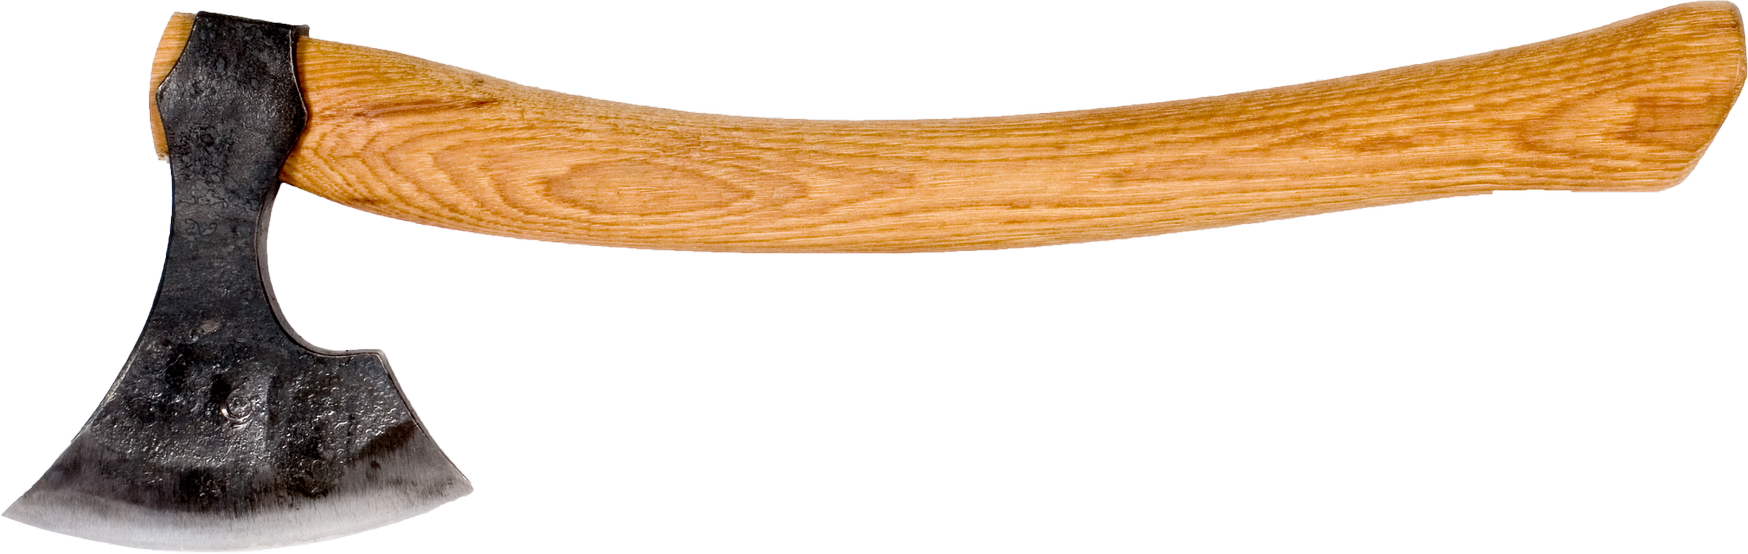 Axe Download Transparent PNG Image